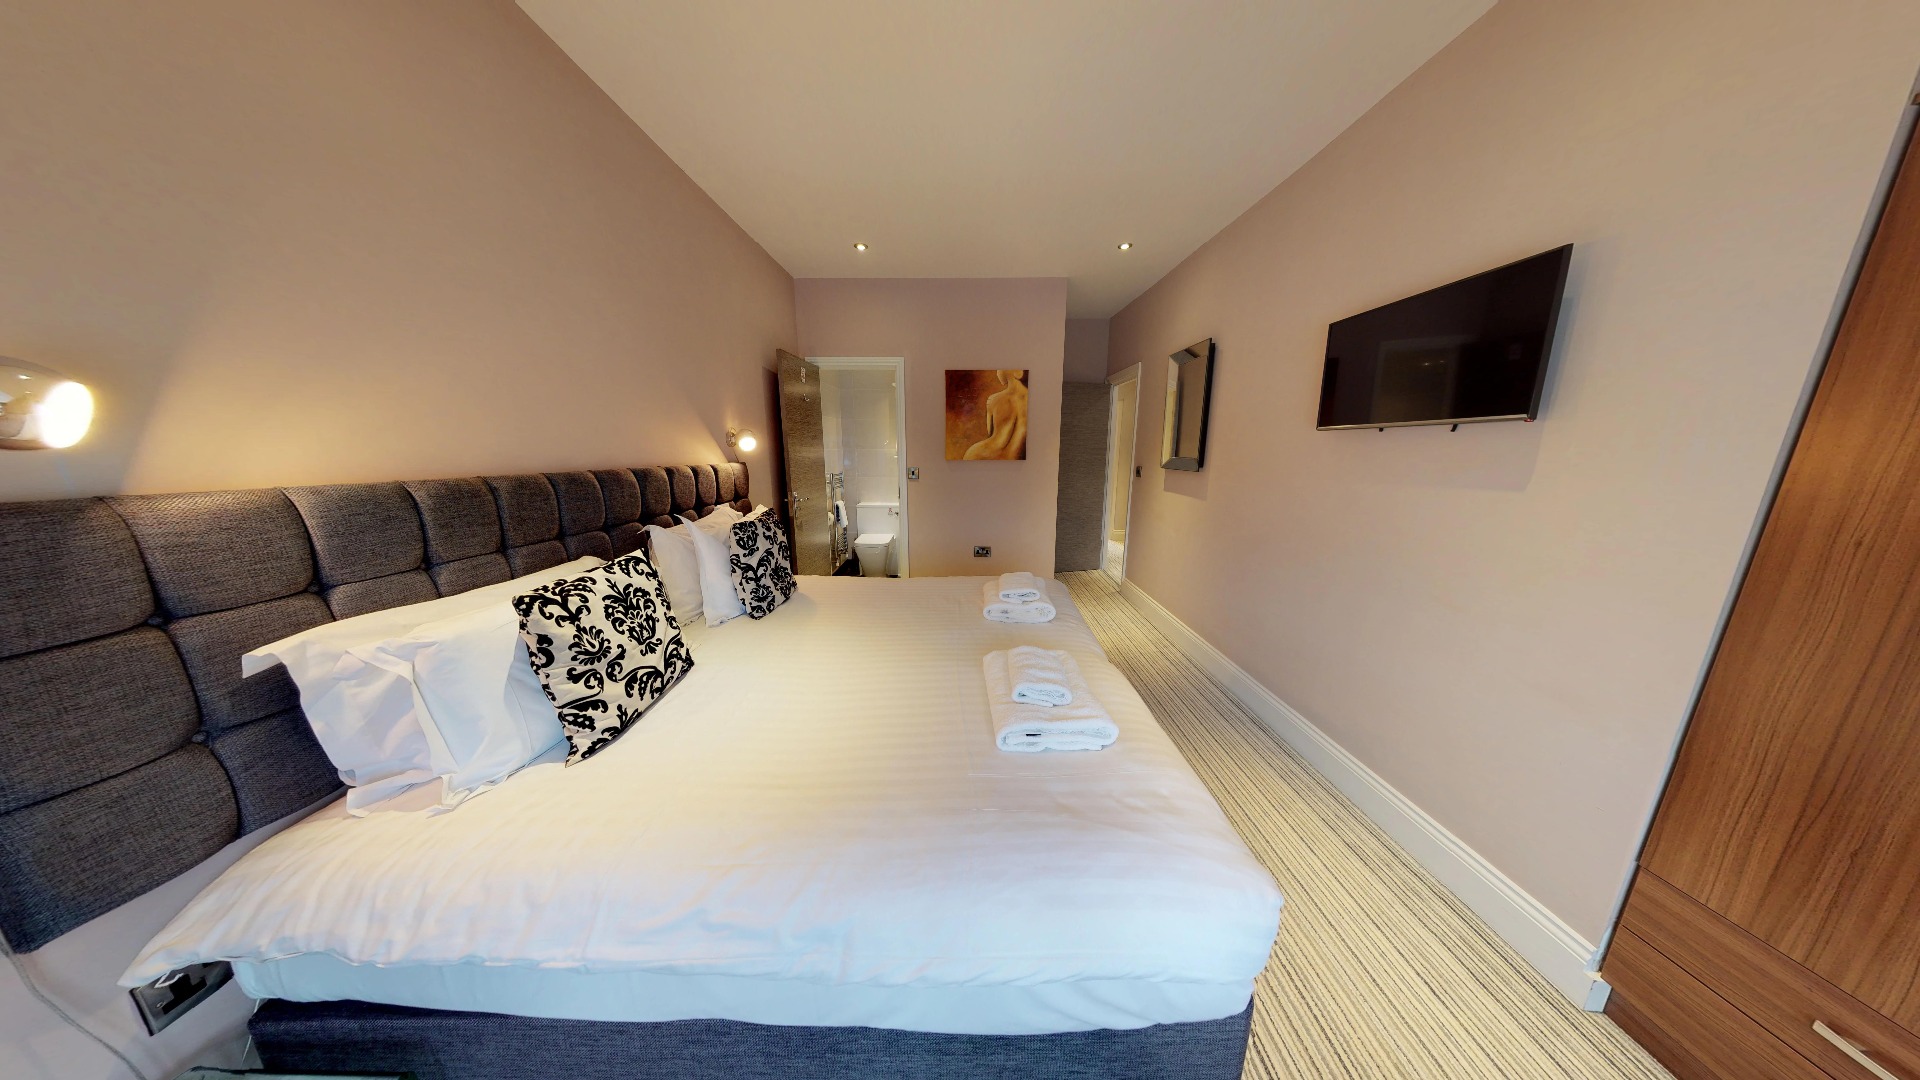 Harrogate Lifestyle Apartments Executive Two bedroom two bathroom apartment to rent in Harrogate town centre Kings Road